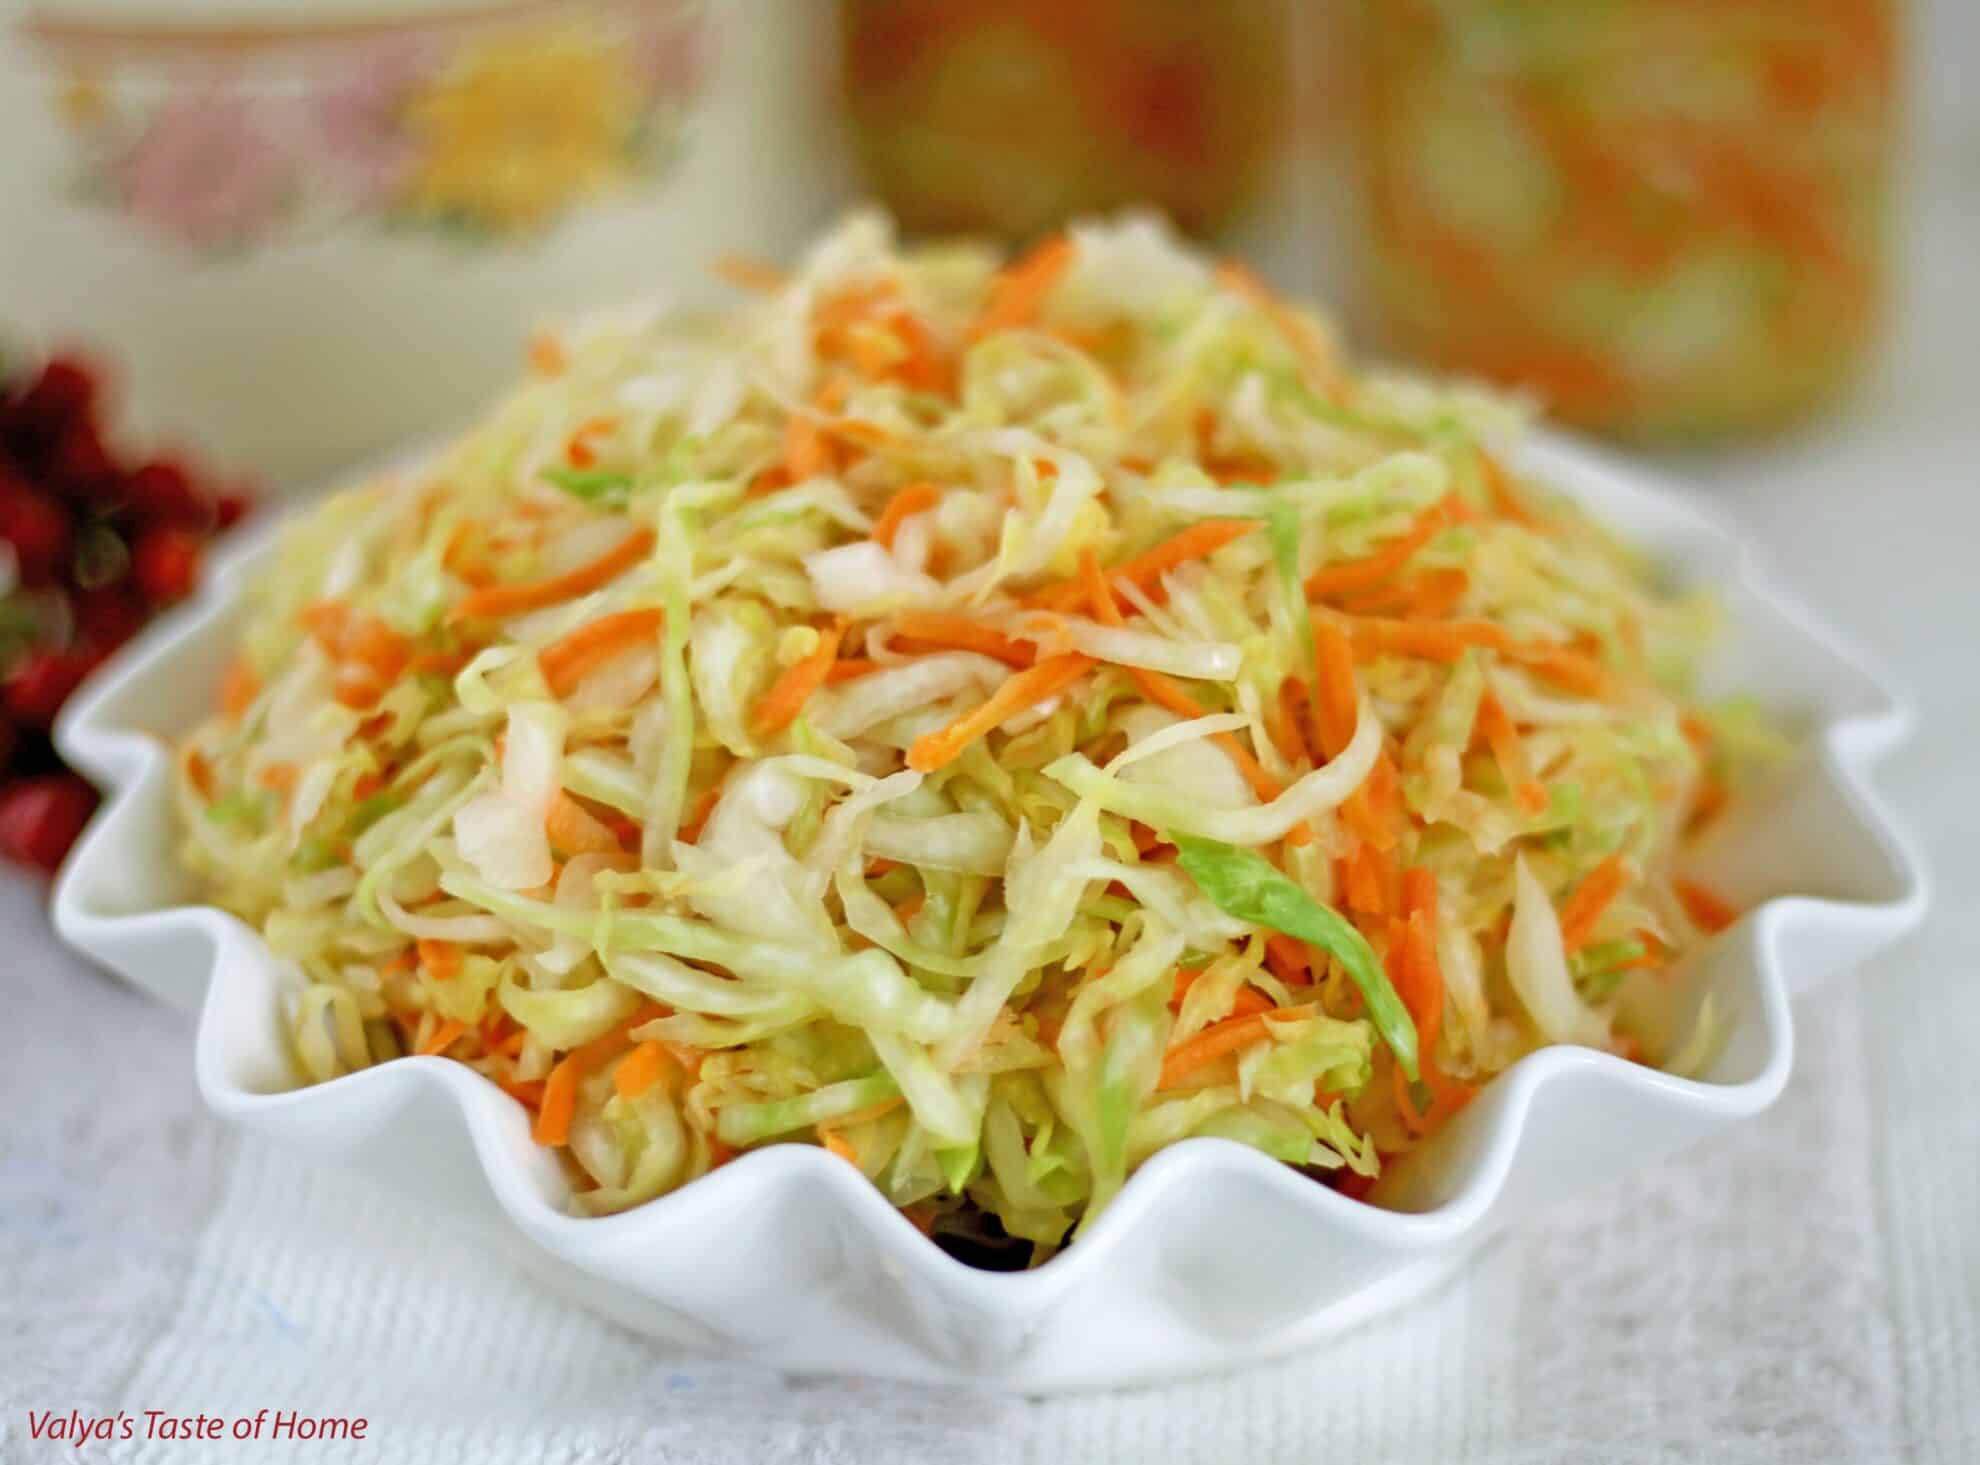 Fermented cabbage recipe is really easy to make. 